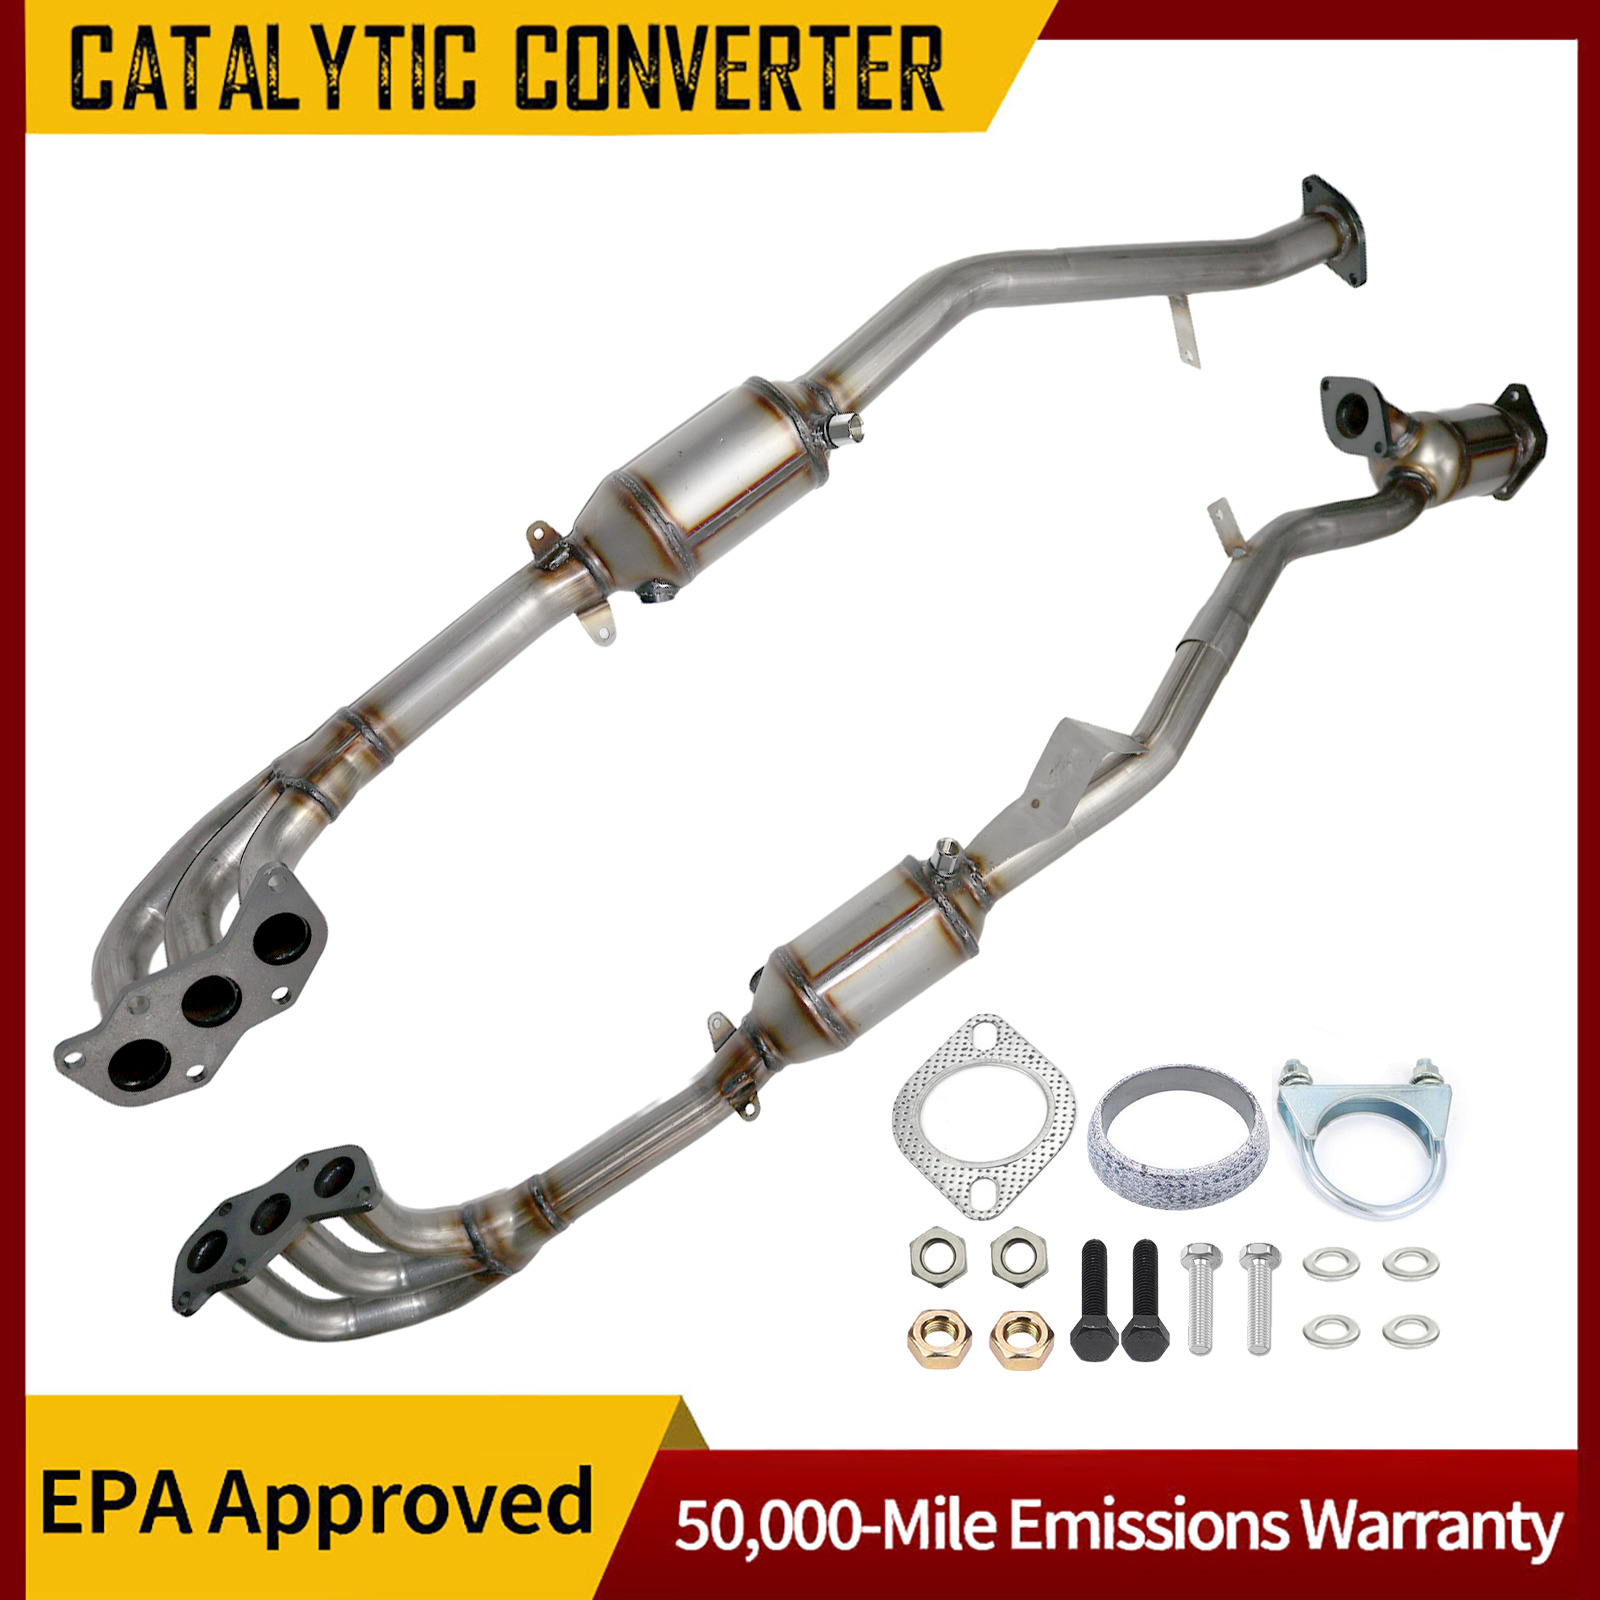 Catalytic Converters for 2005-2009 Subaru Outback B9 Tribeca Legacy 3.0L 3.6L